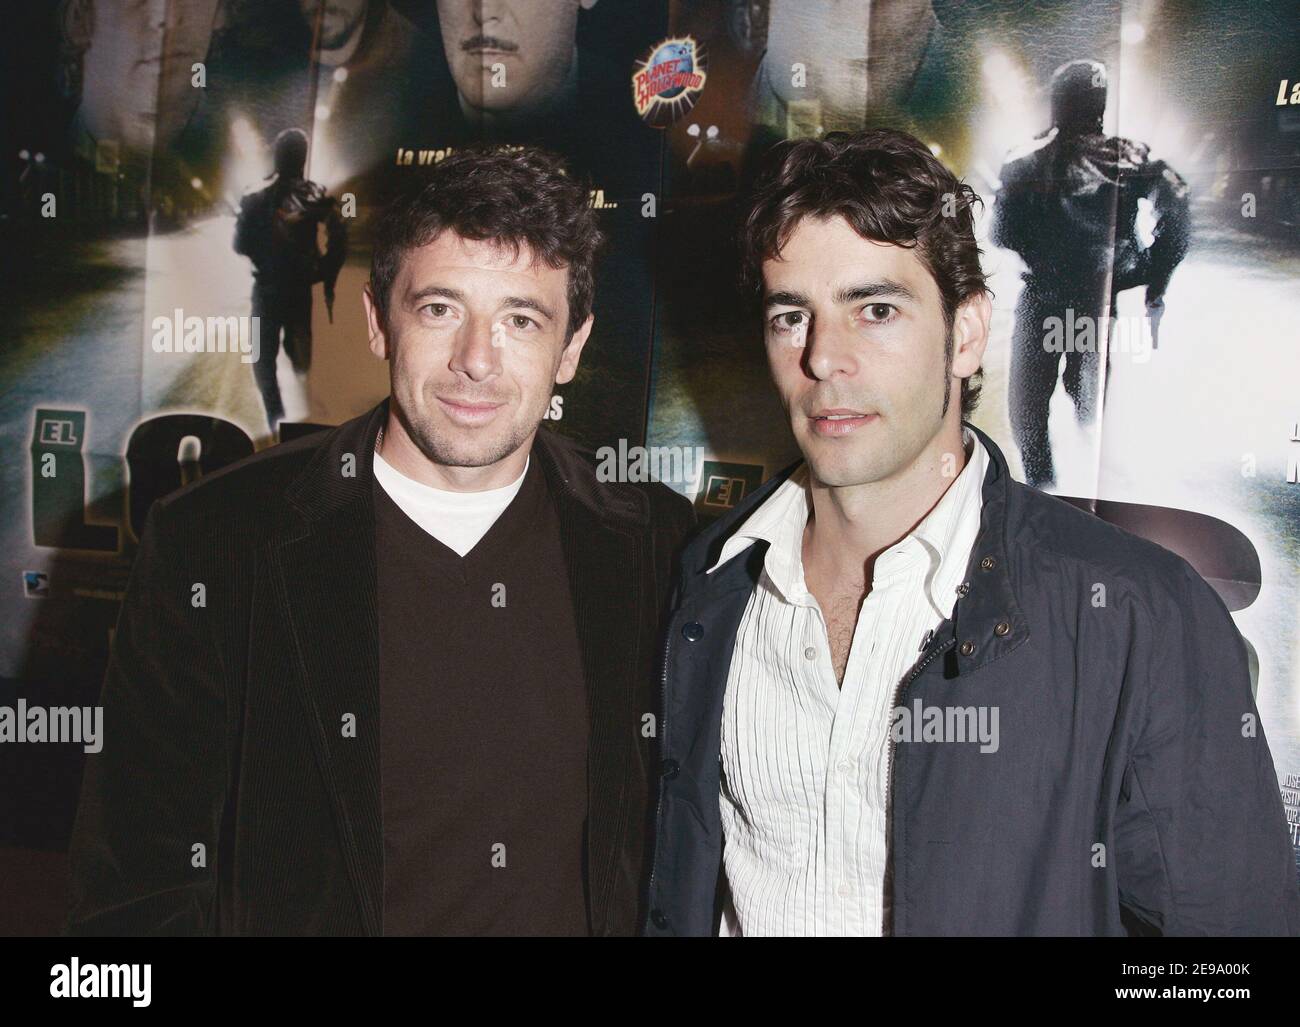 French actor Patrick Bruel and Spanish actor Eduardo Noriega attend the 'El Lobo' premiere at the Planete Holywood restaurant, in Paris, France, on April 24, 2006. Photo by Laurent Zabulon/ABACAPRESS.COM Stock Photo